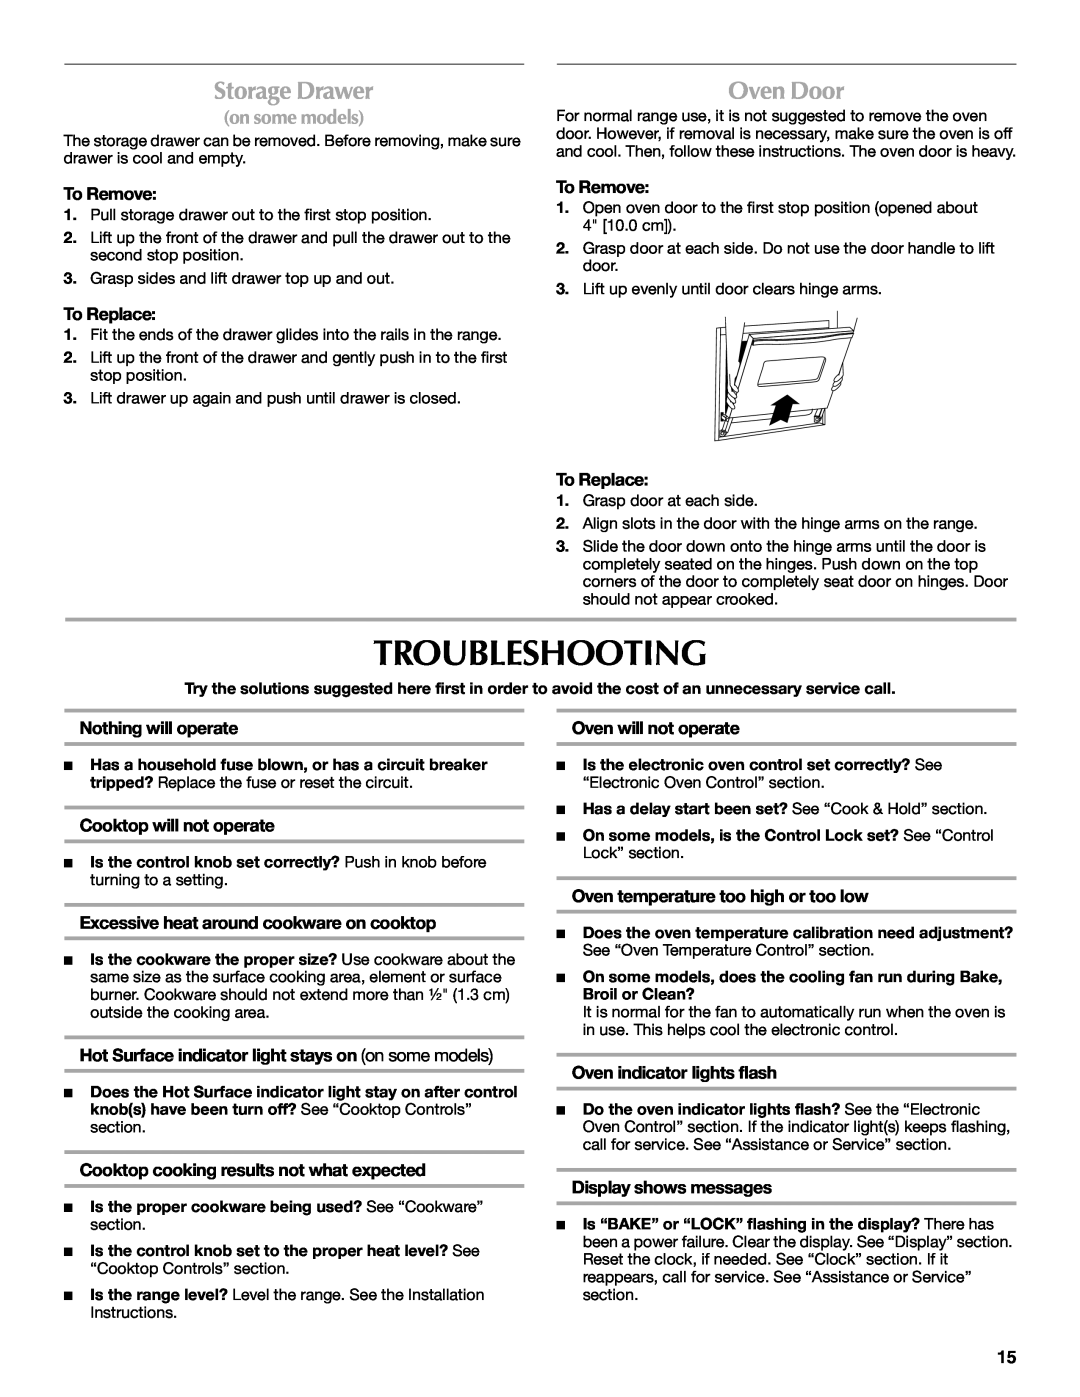 Maytag W10430917A manual Troubleshooting, Storage Drawer, Oven Door, To Remove, Nothing will operate, Oven will not operate 